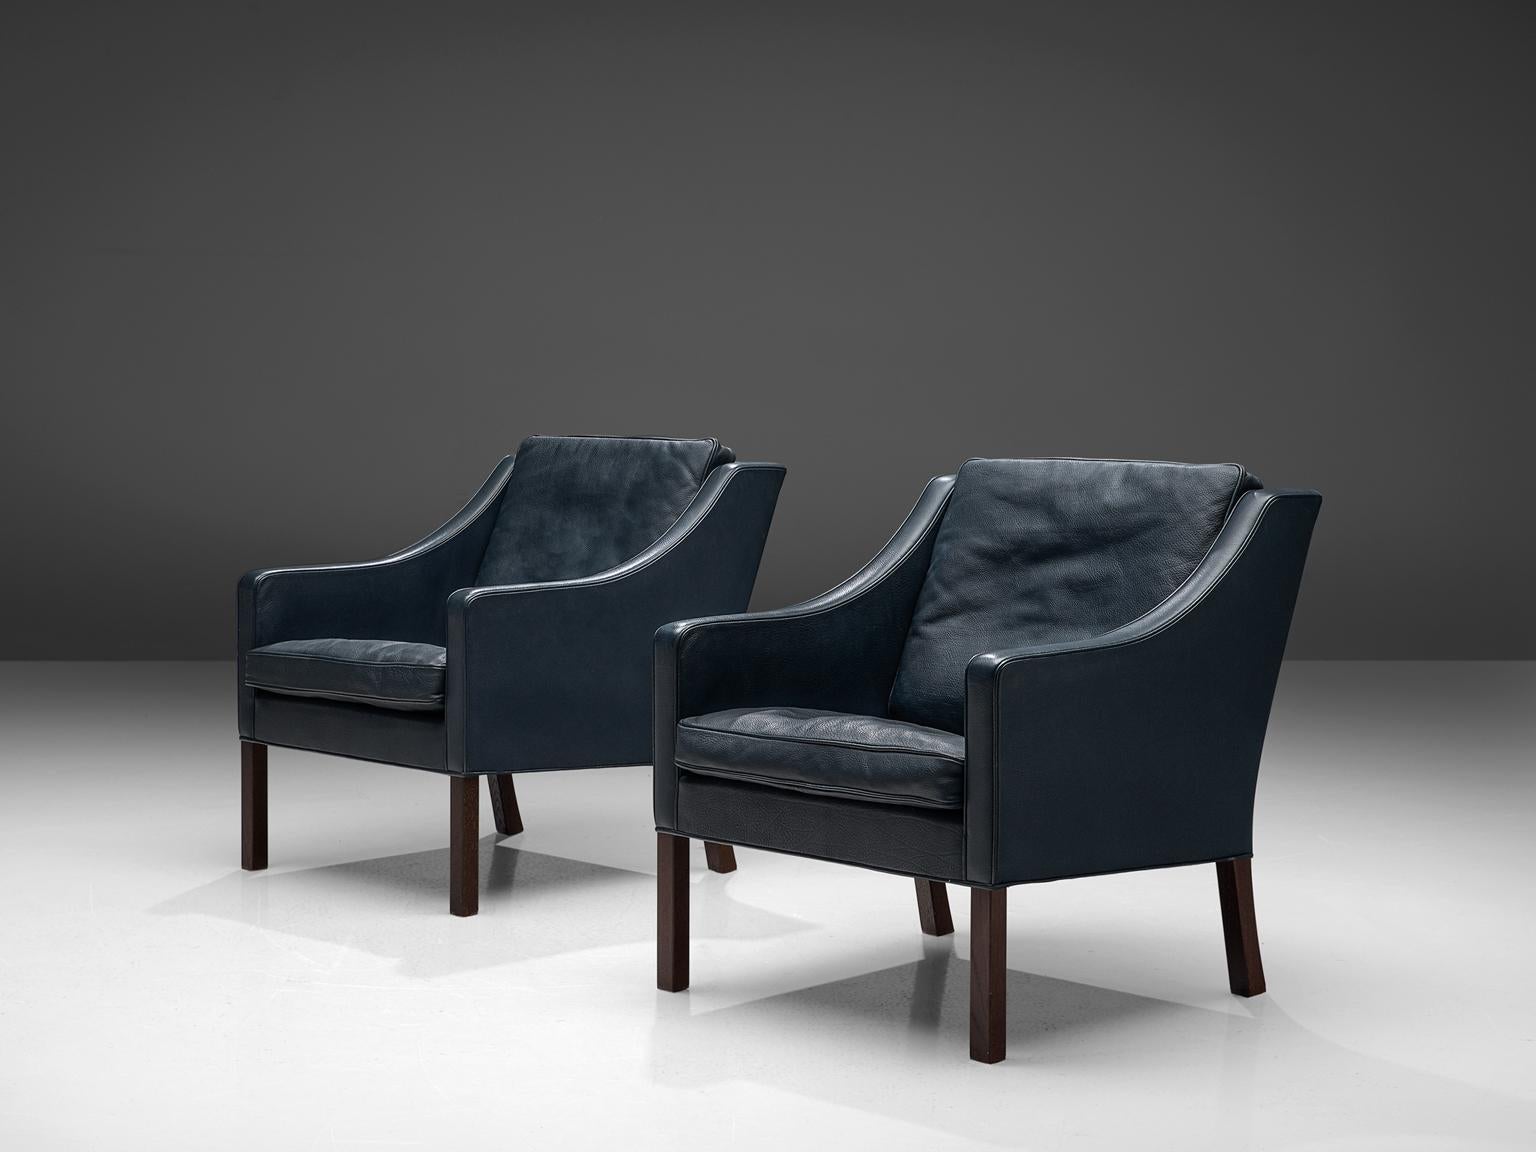 Børge Mogensen for Fredericia Møbelfrabirk, pair of two '2207' Lounge Chairs, Leather and stained beech, Denmark, design 1963.

Comfortable set of two lounge chairs with an elegant design by Børge Mogensen. These armchairs have a low, curved back,